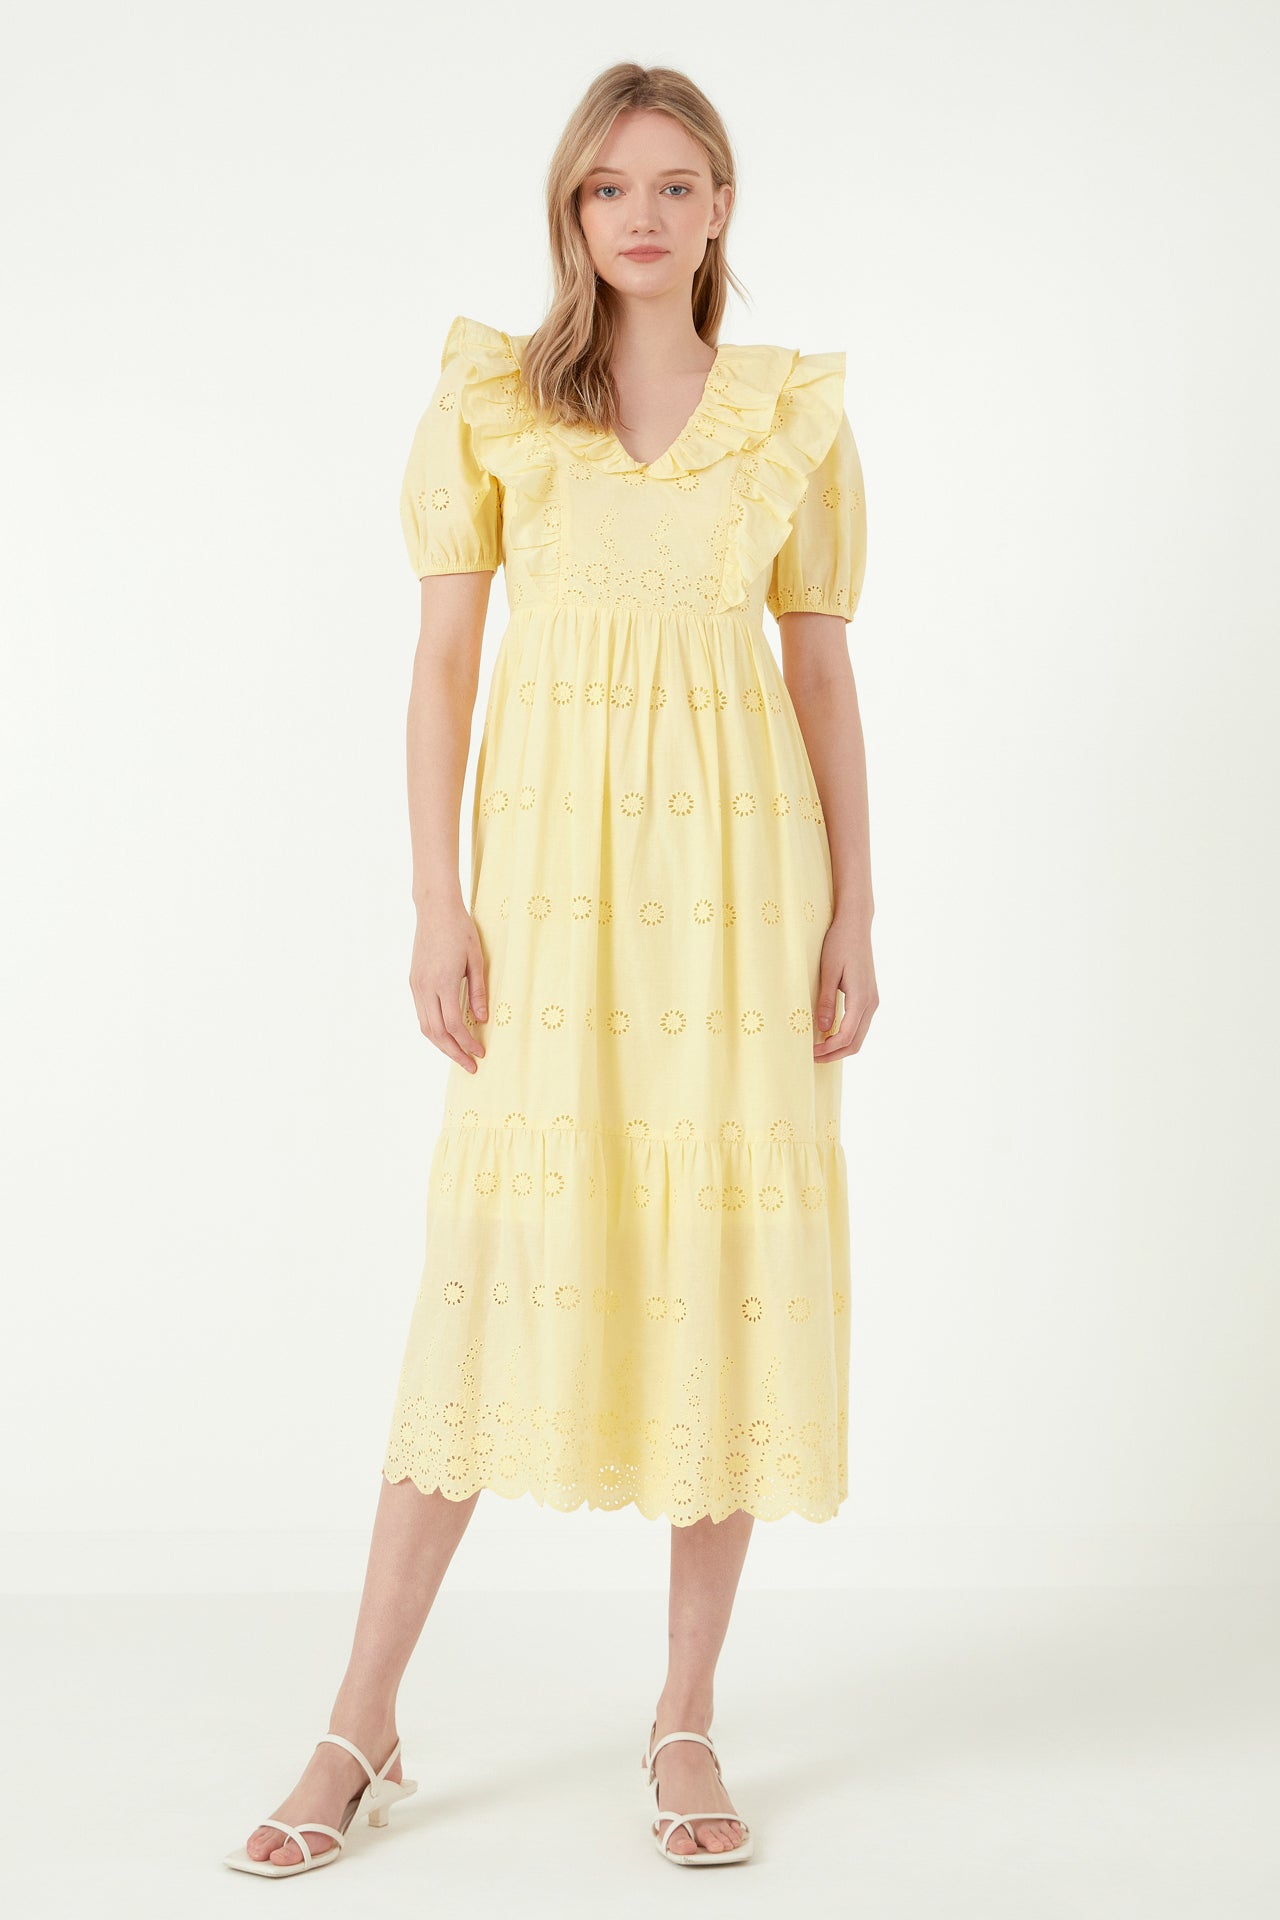 FREE THE ROSES - Eyelet Embroidered Midi Dress - DRESSES available at Objectrare